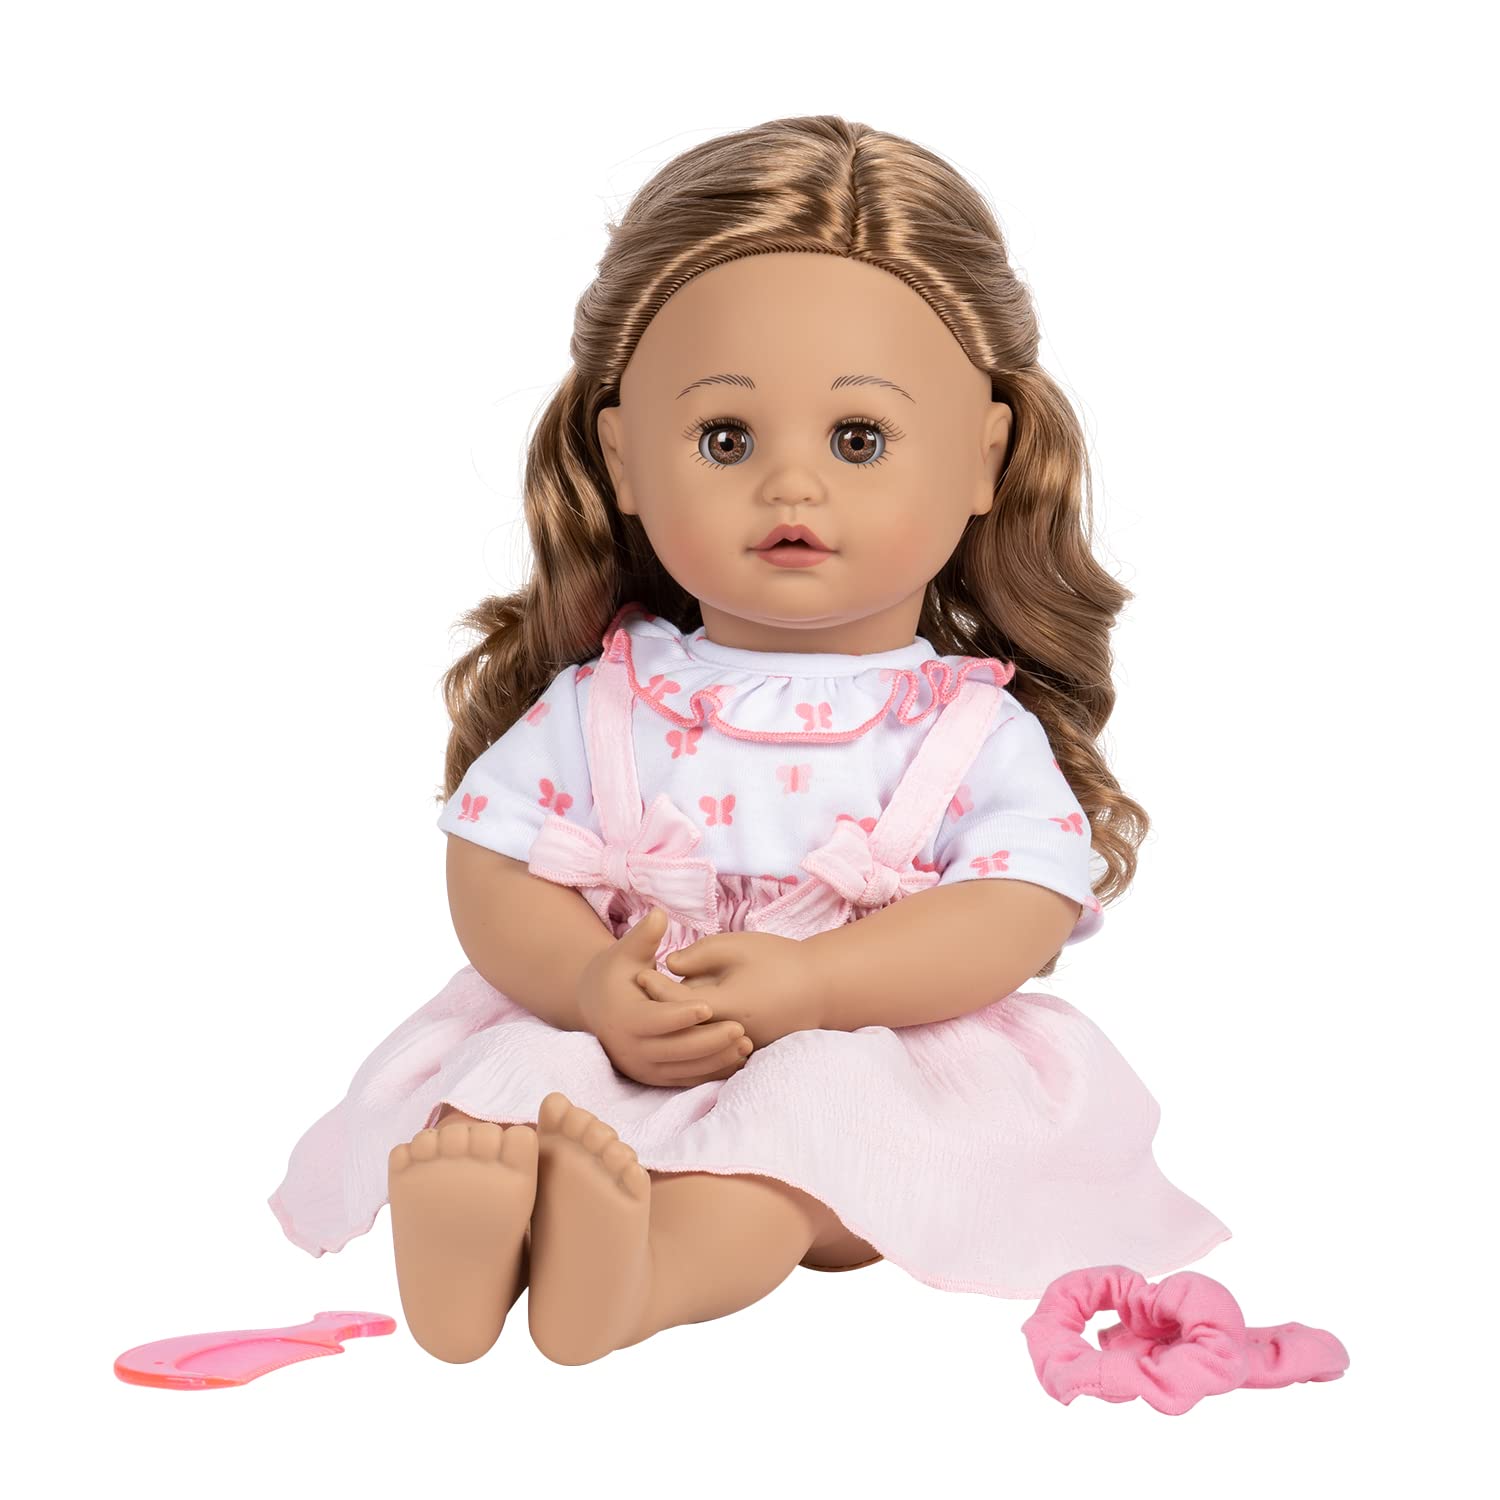 Adora My Sweet Hair Style Doll Sofia, 15 inch Toddler Doll with Silky Soft Long Brown Hair, Open/Close Brown Eyes & Medium Skin Tone